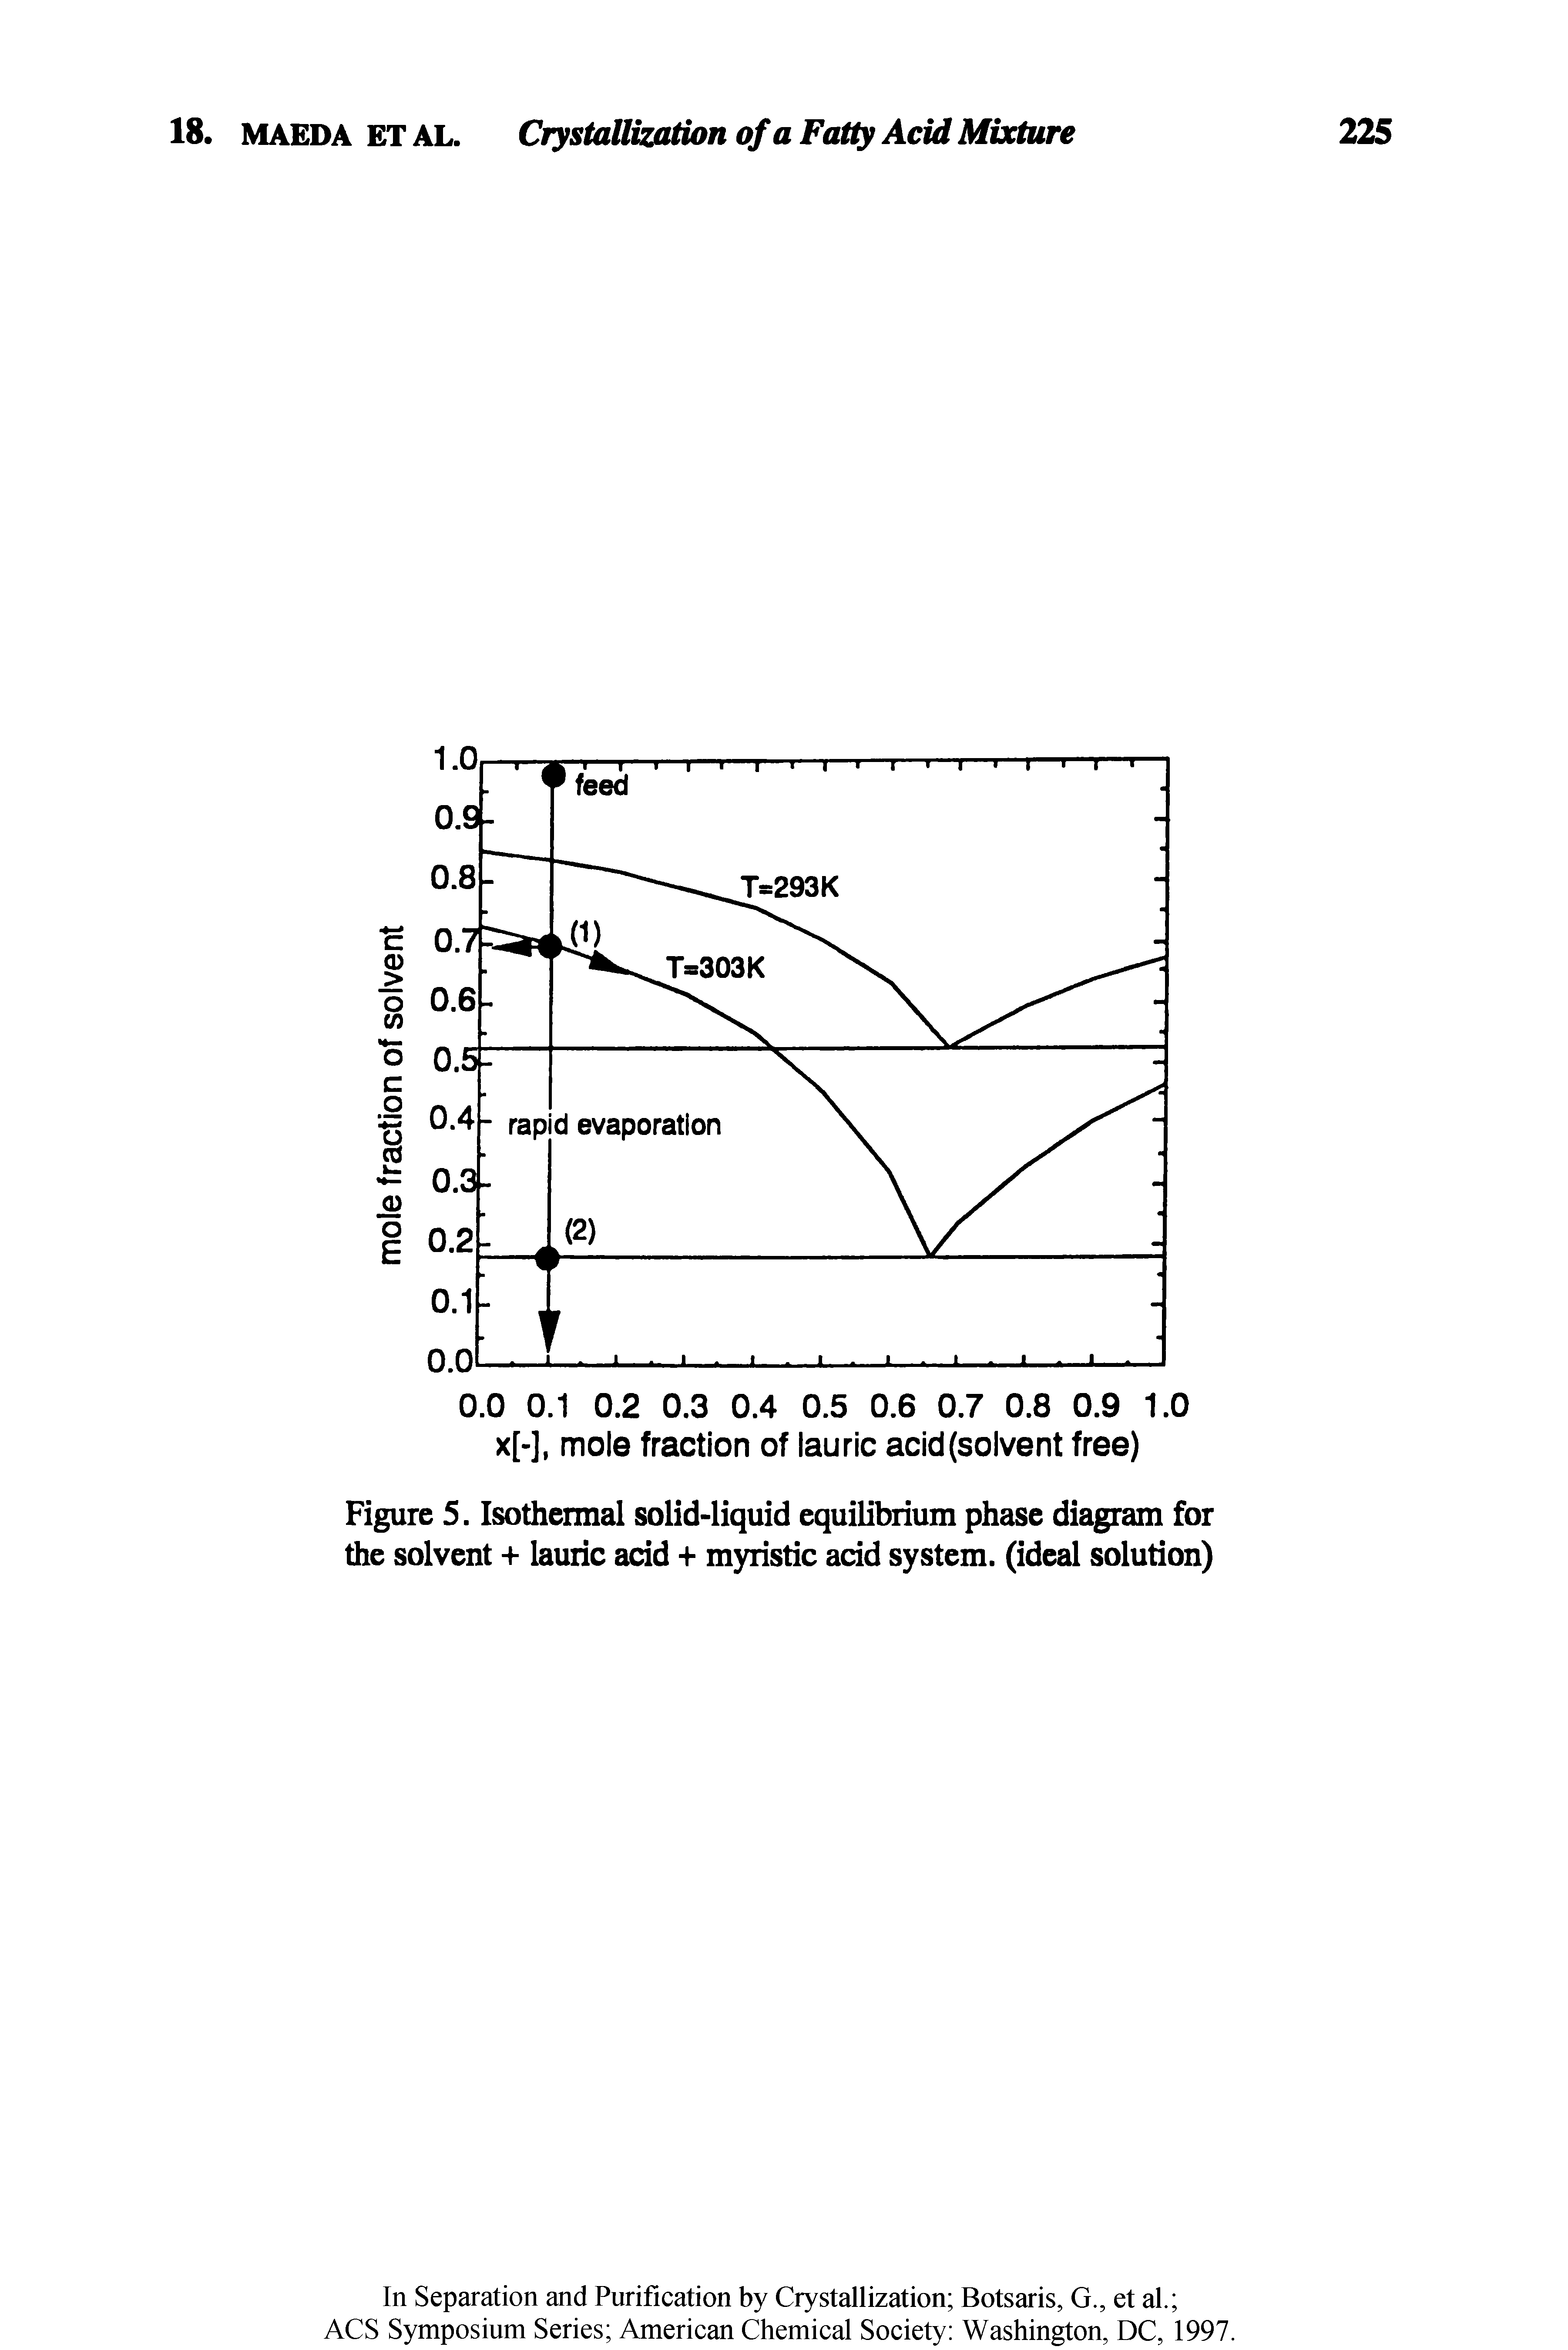 Figure 5. Isothermal solid-liquid equilibrium phase diagram for the solvent + lauric acid + myristic acid system, (ideal solution)...